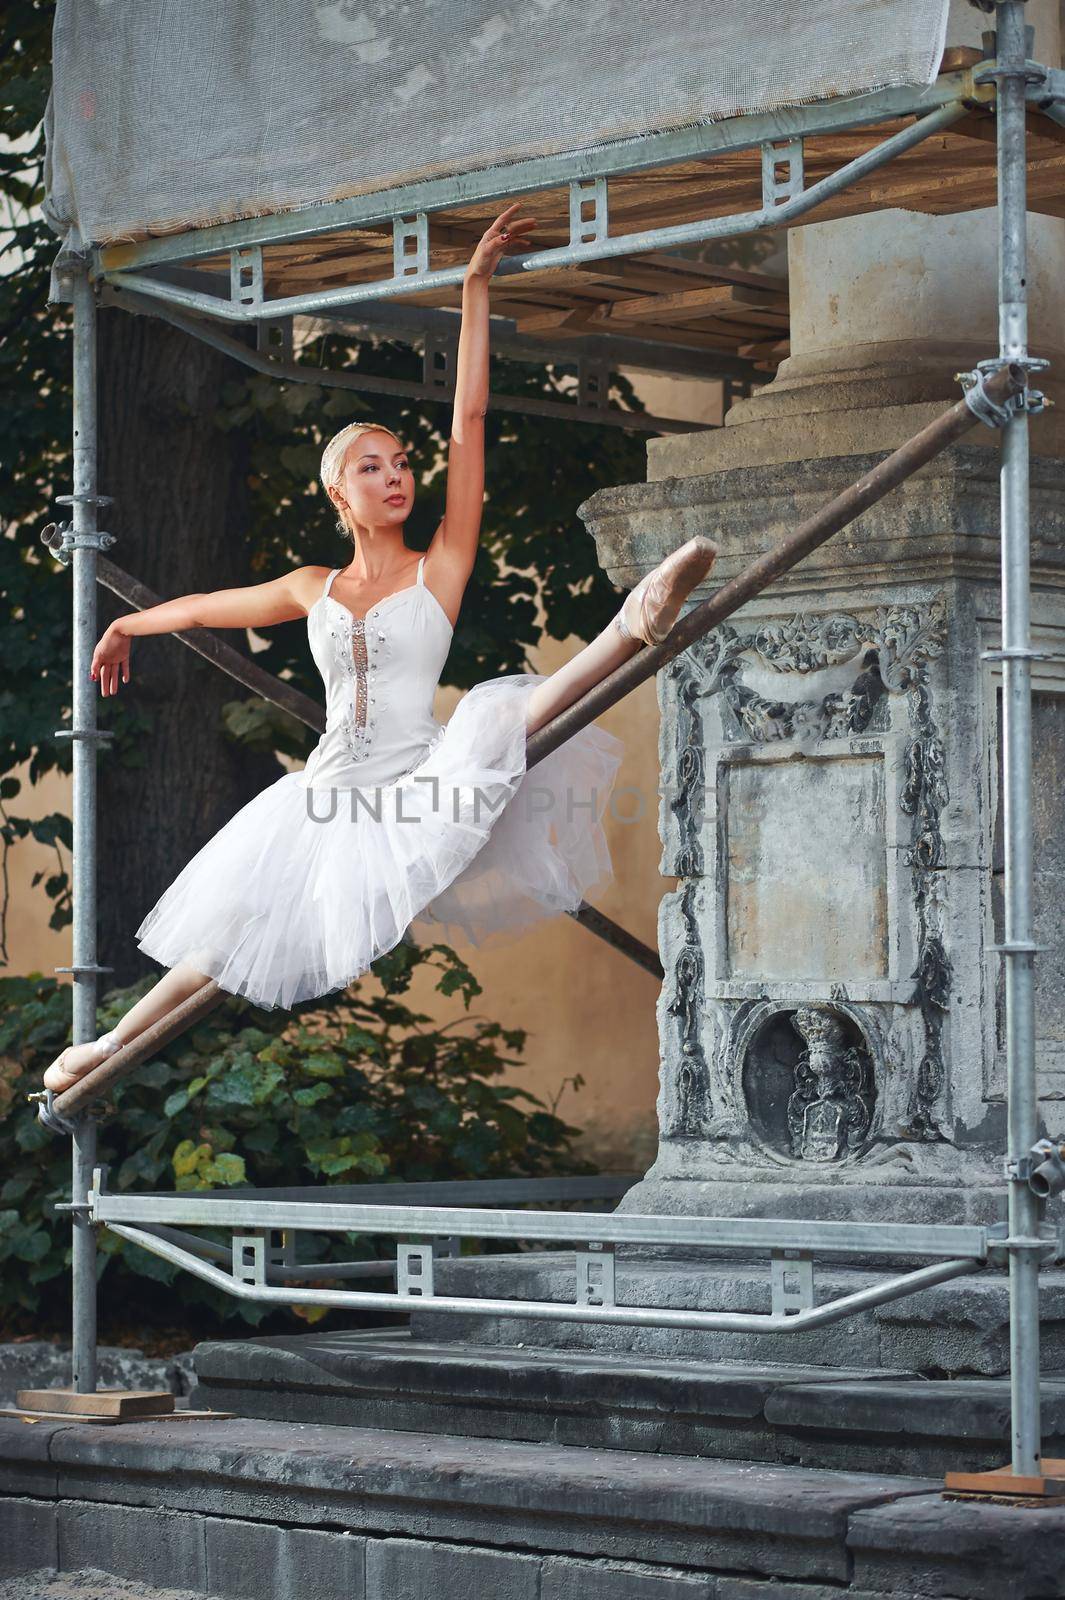 Gorgeous ballerina doing splits balancing gracefully performing on the construction site at the city.